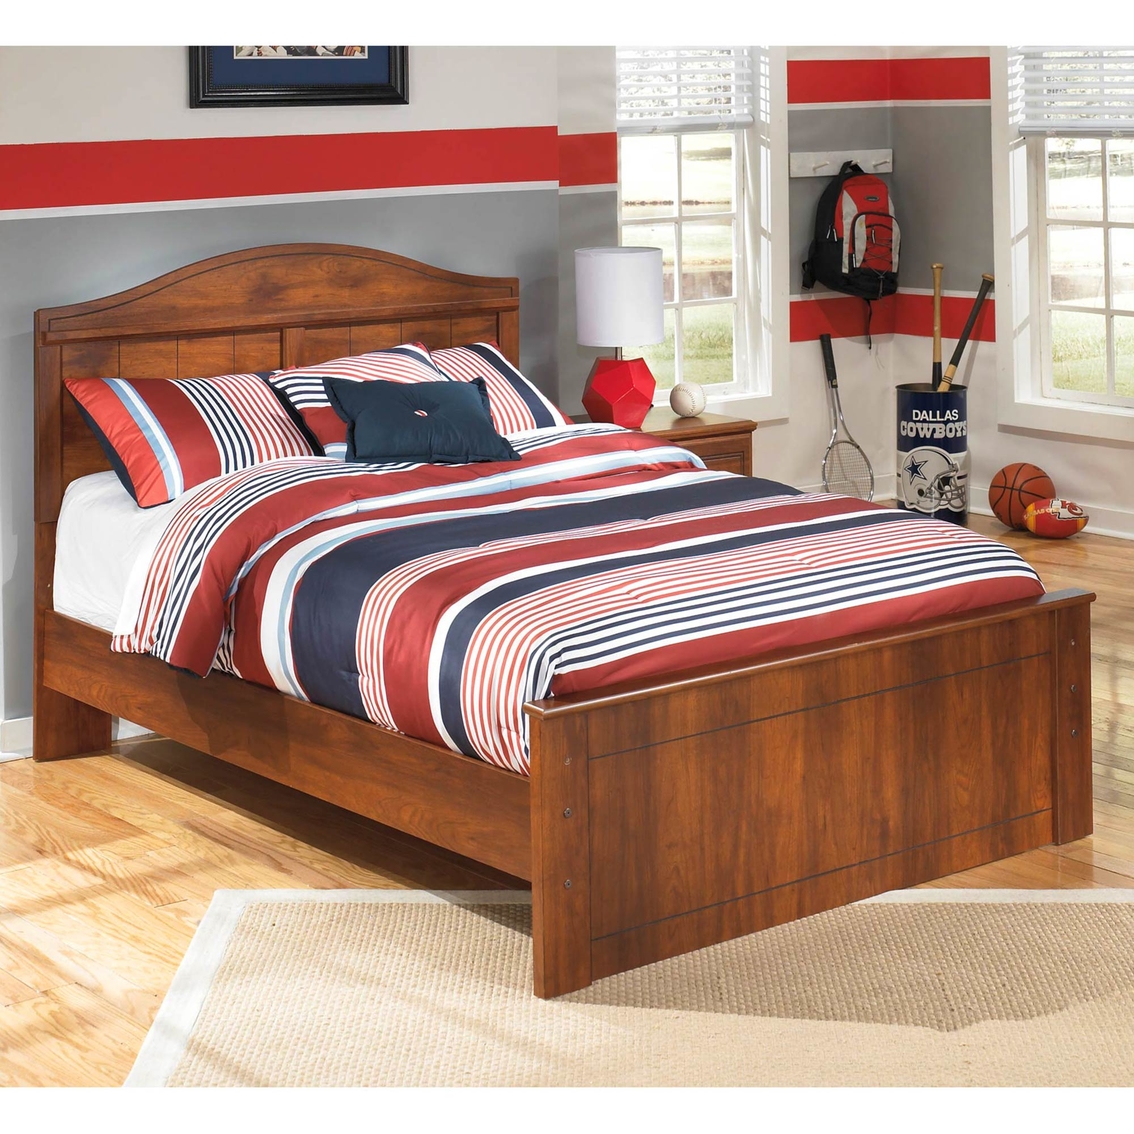 Ashley Barchan Panel Bed - Image 2 of 4